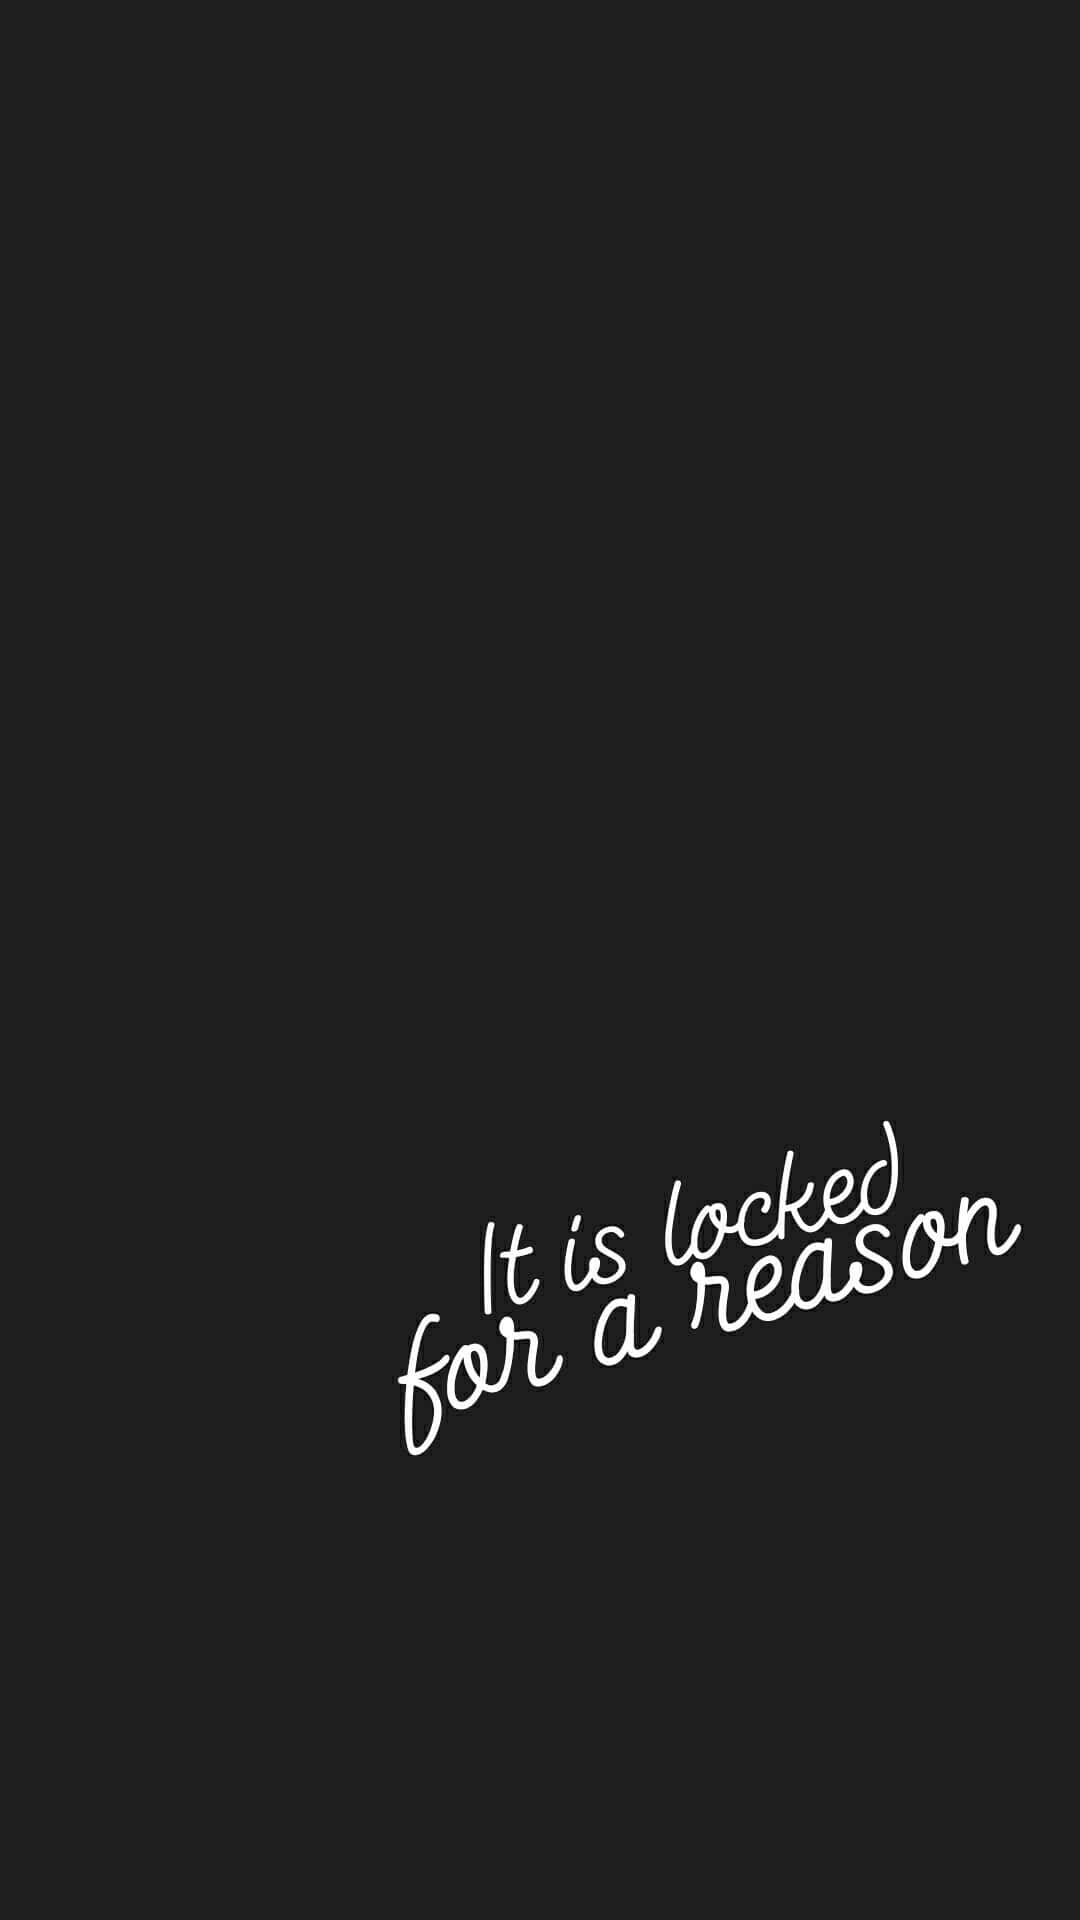 It Is Called For A Reason Wallpaper